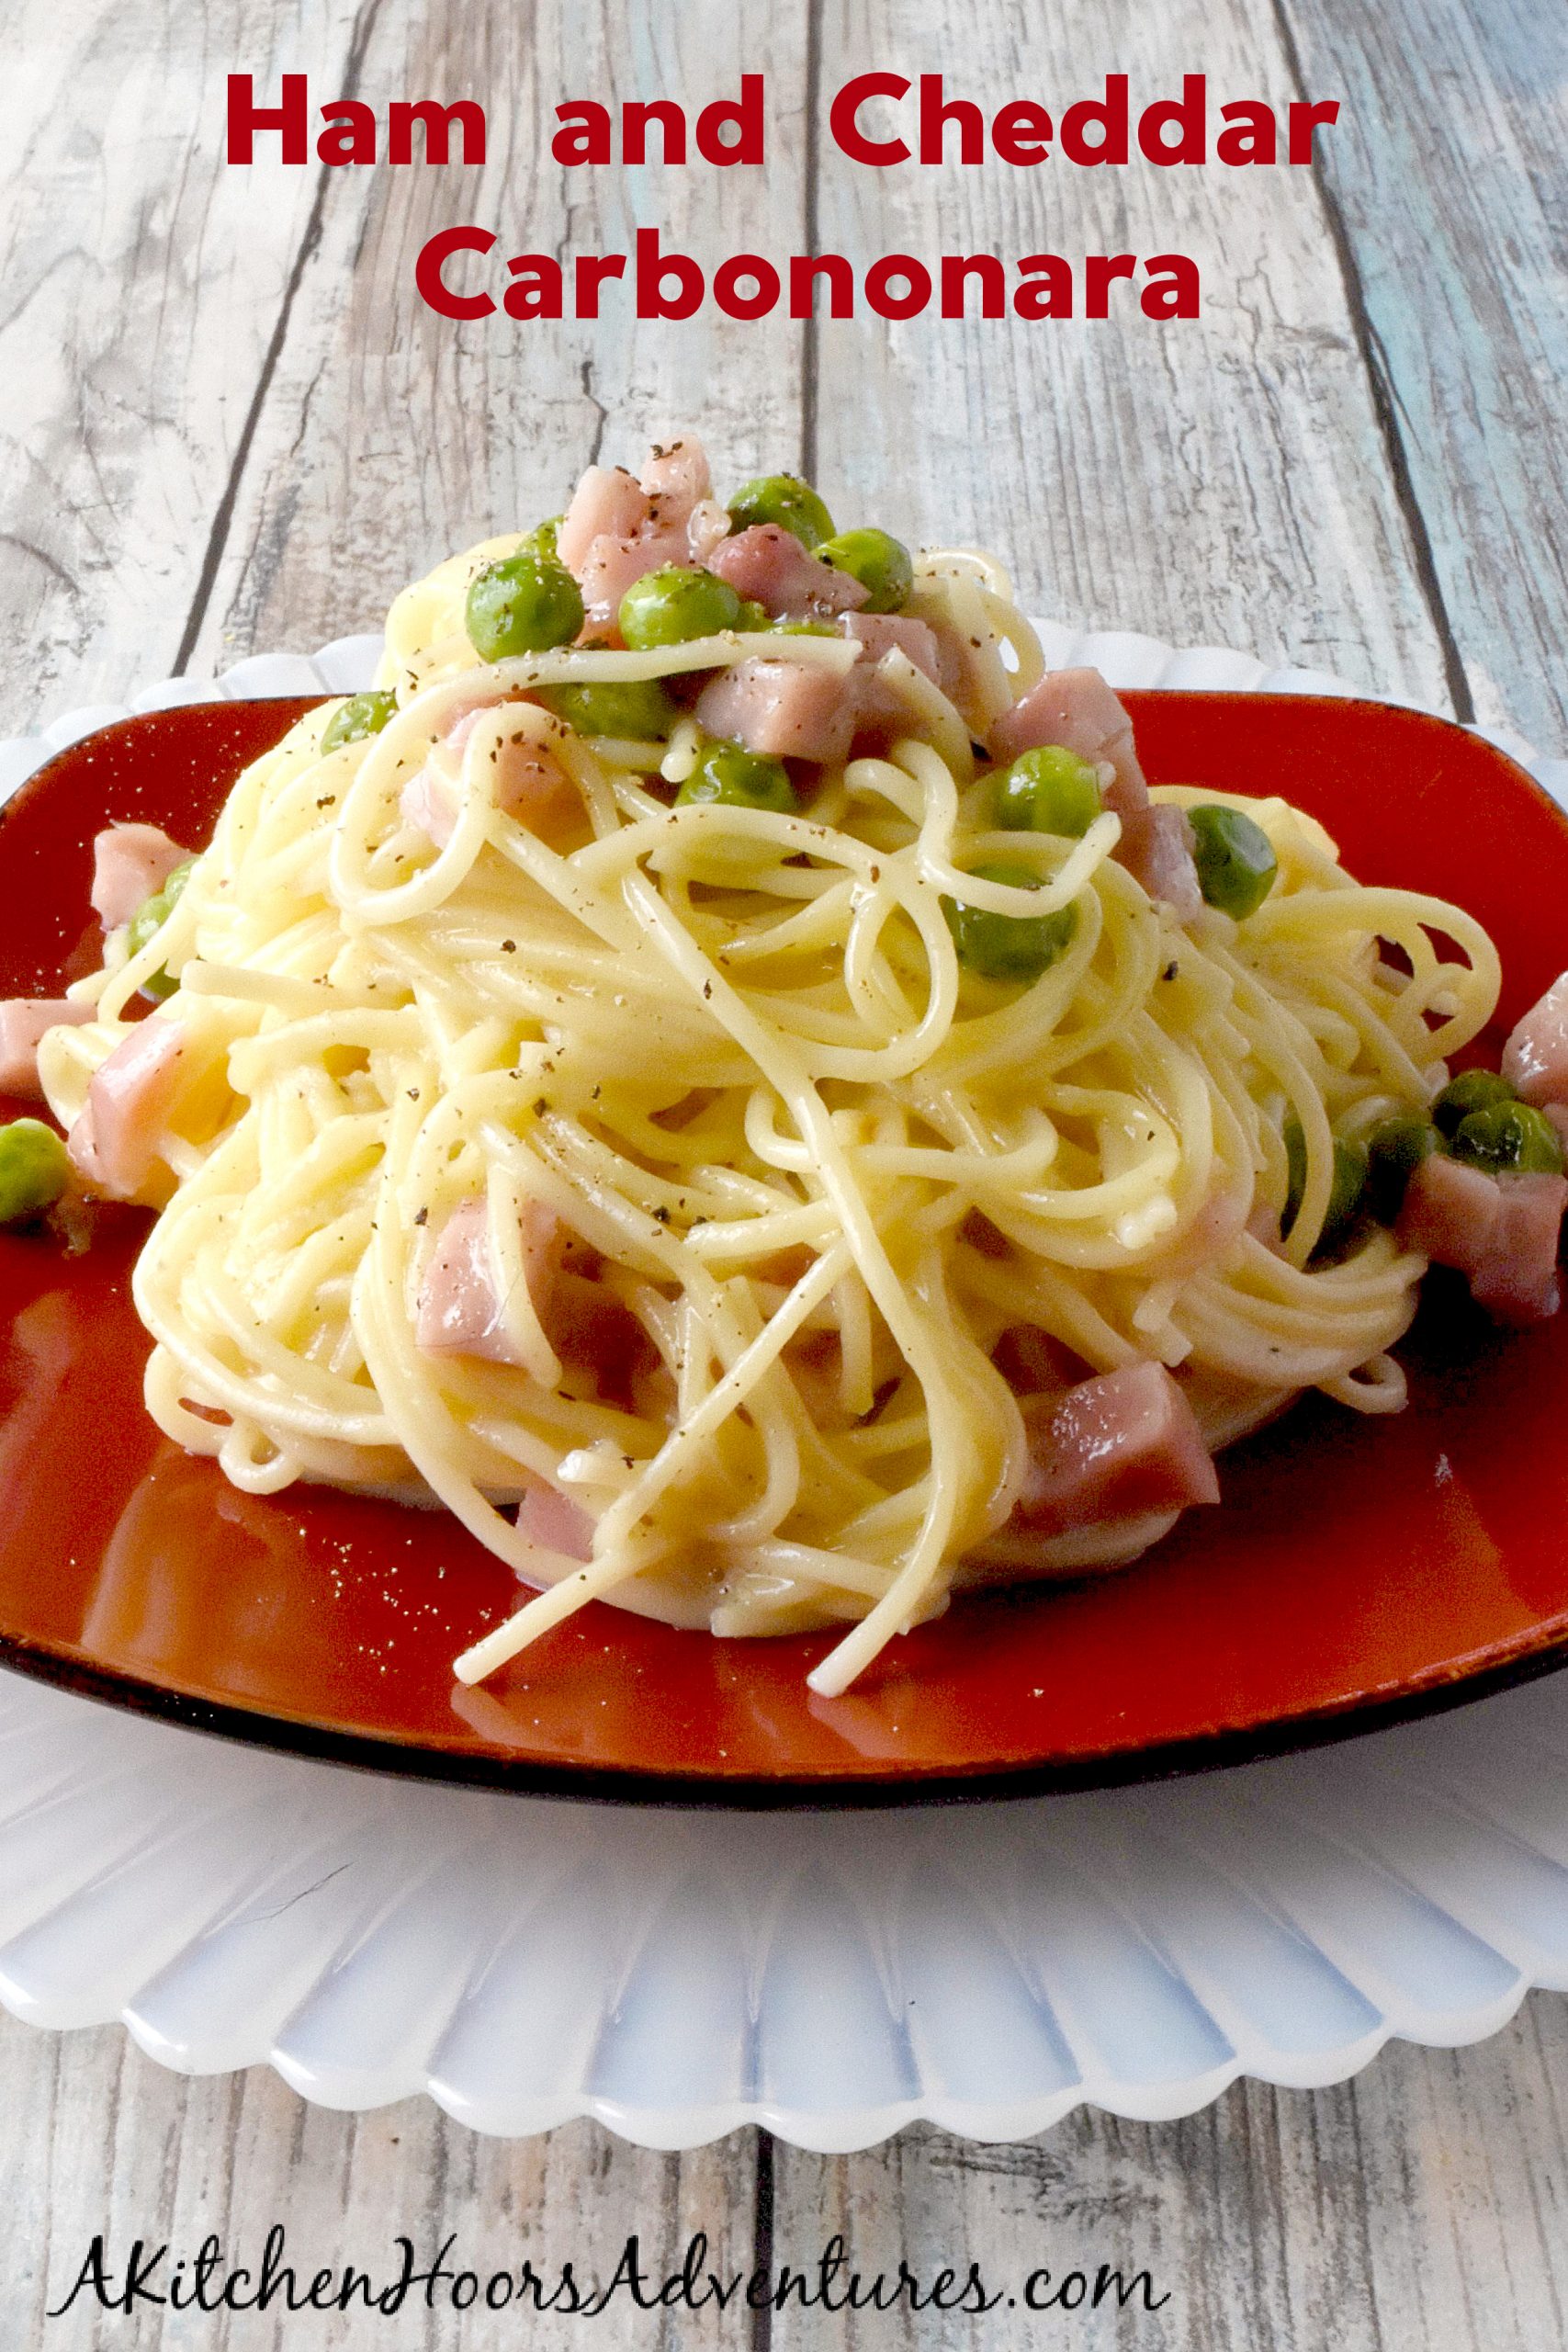 Ham and Cheddar Carbonara is easy to make with only four ingredients but tastes off the charts delicious! Just like grown up macaroni and cheese you could serve at your next dinner party.  #CabotBudgetMeals